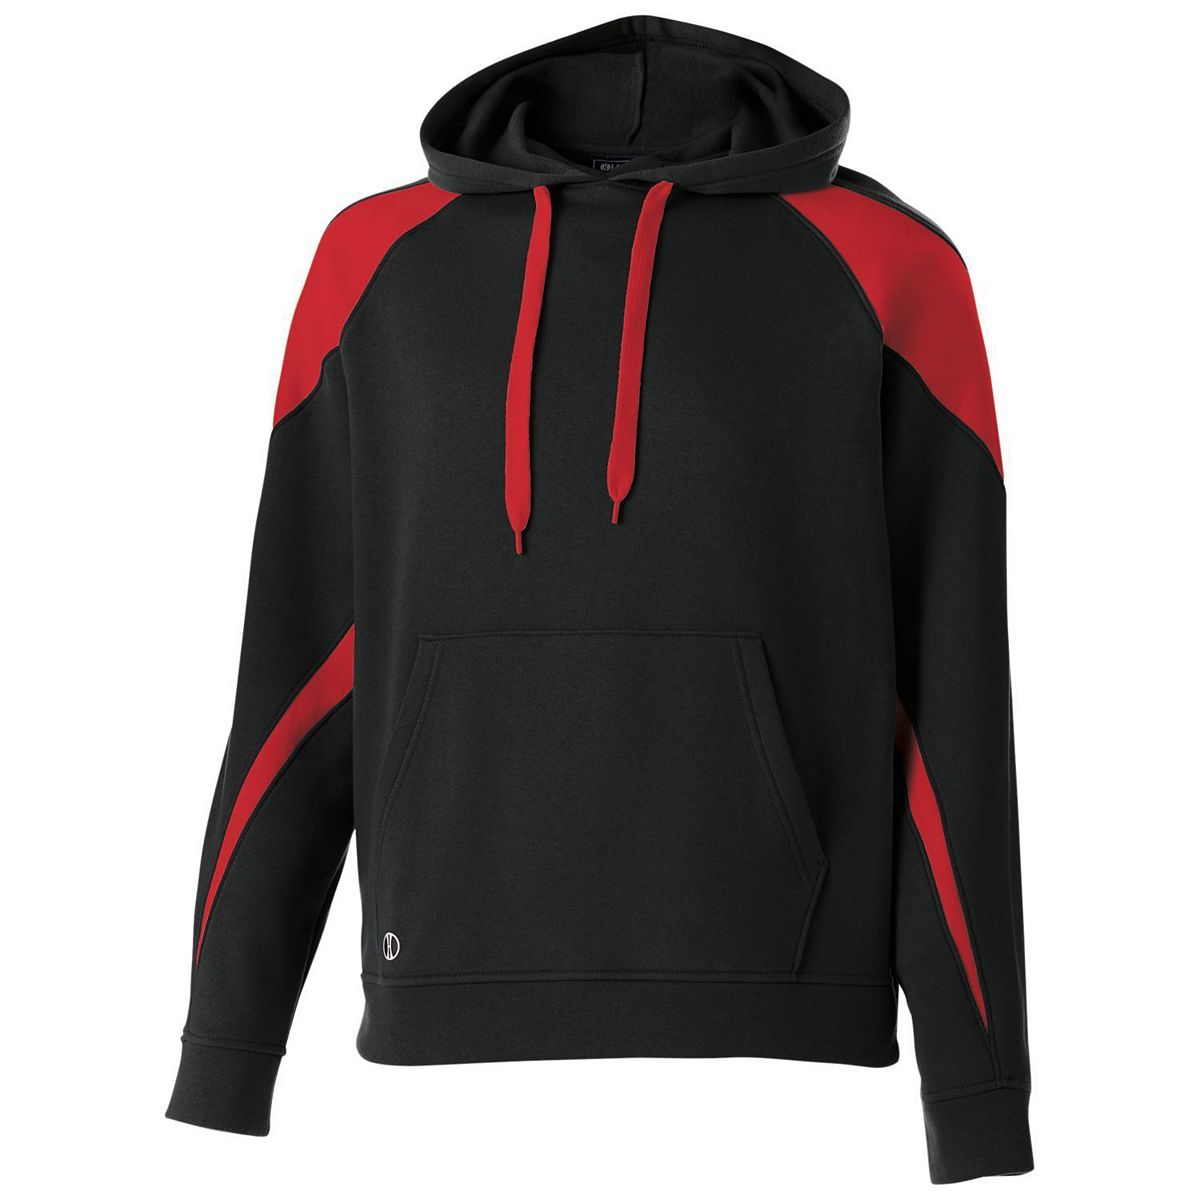 Holloway Youth Prospect Hoodie in Black/Scarlet  -Part of the Youth, Youth-Hoodie, Hoodies, Holloway product lines at KanaleyCreations.com